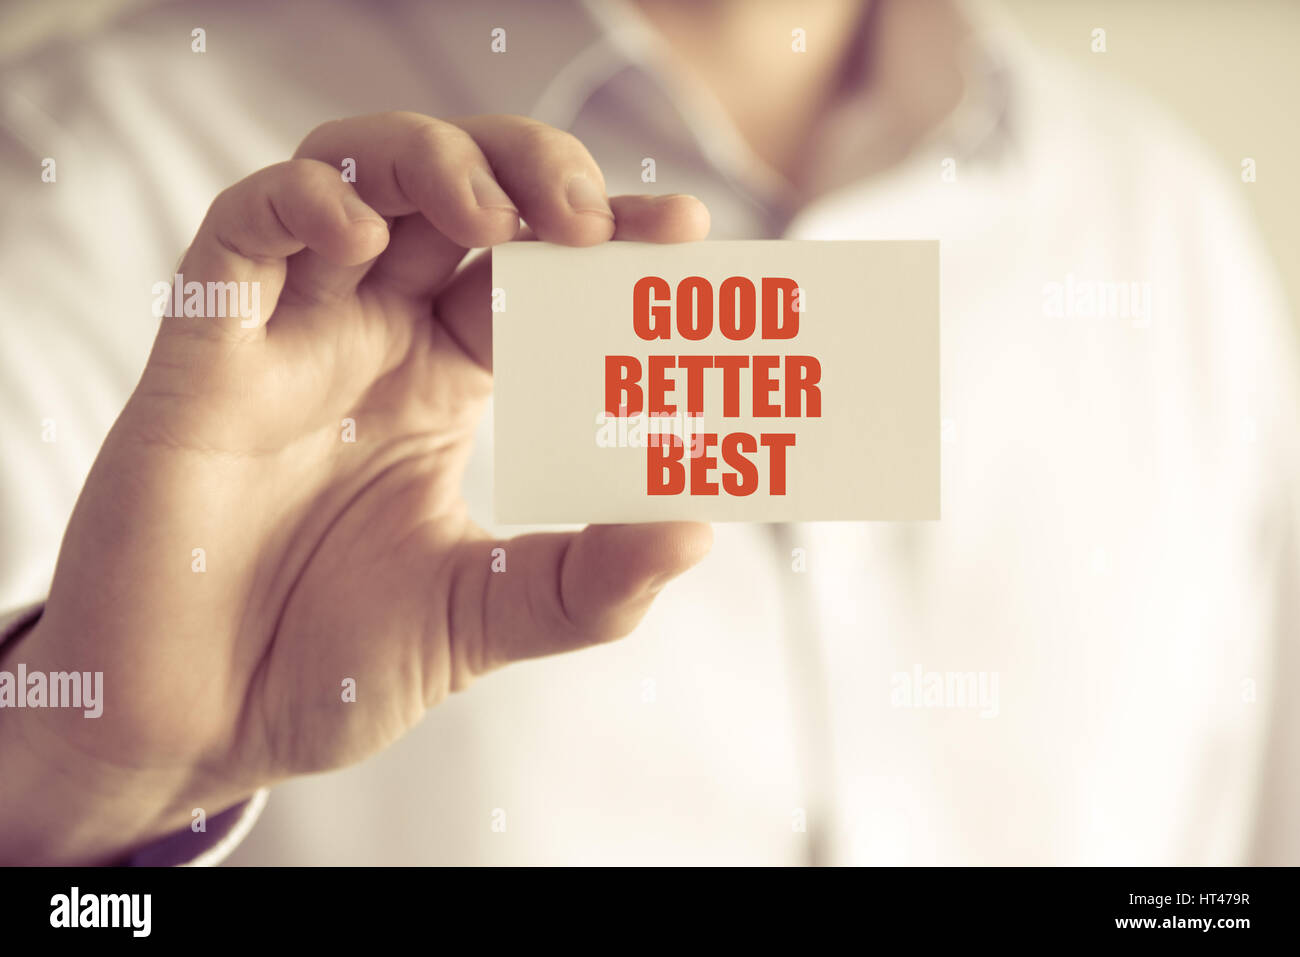 Closeup on businessman holding a card with text GOOD BETTER BEST, business concept image with soft focus background and vintage tone Stock Photo